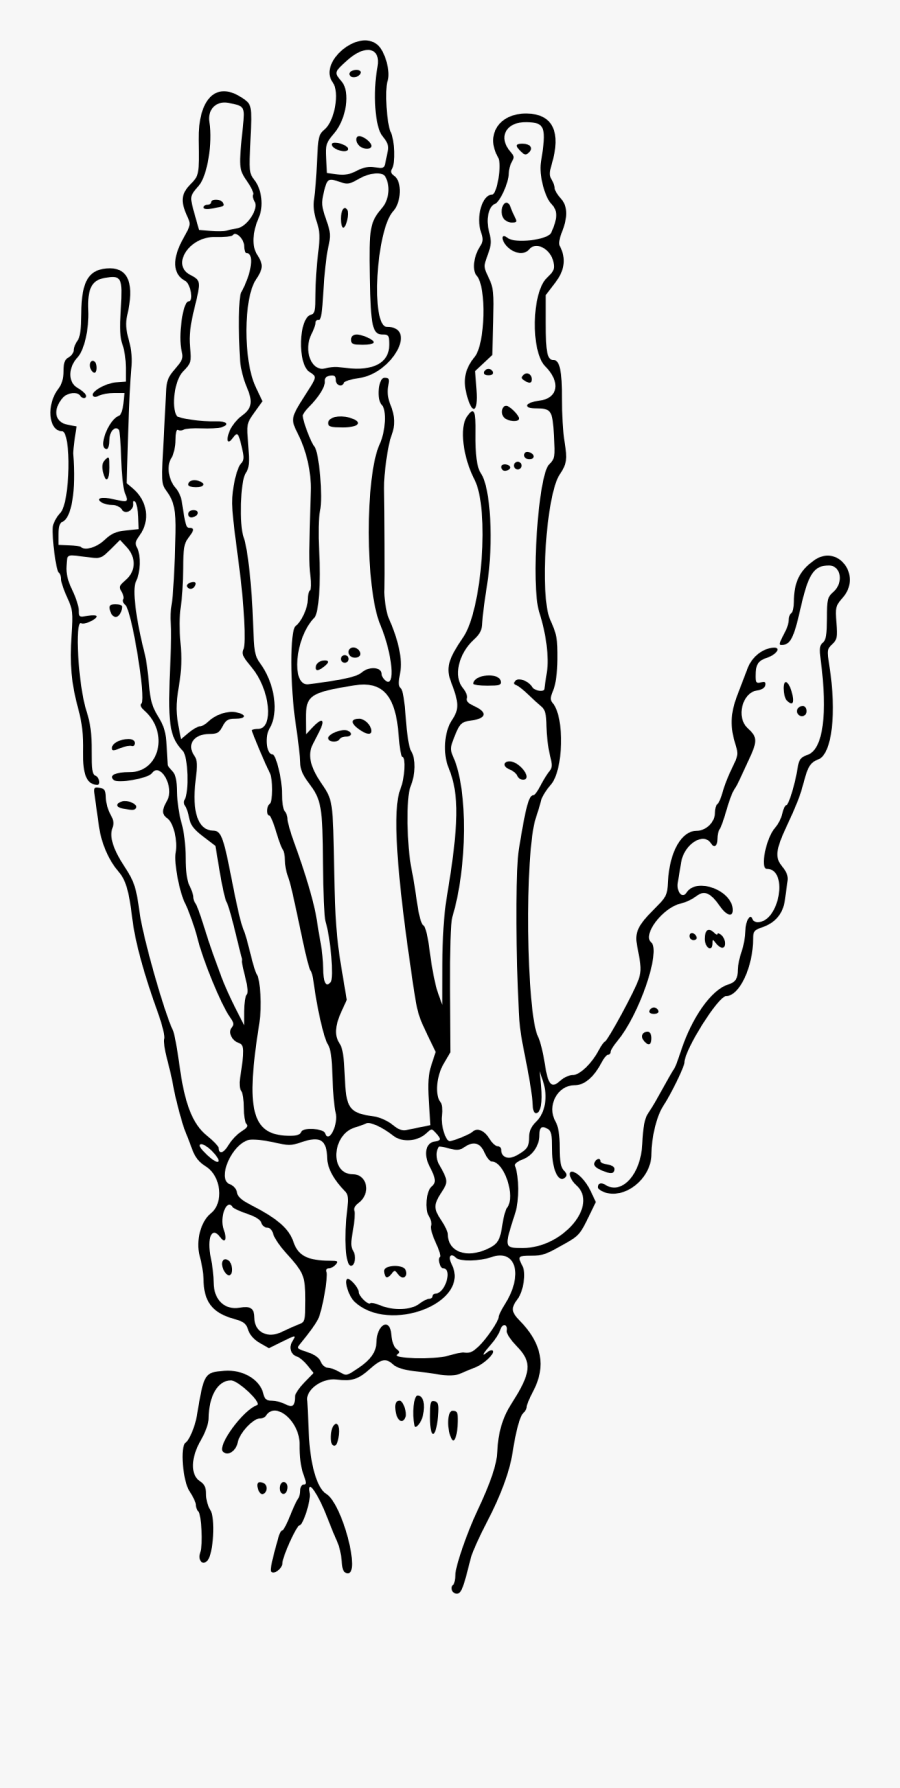 Bones Of The Hand - Human Hand Skeleton Drawing, Transparent Clipart